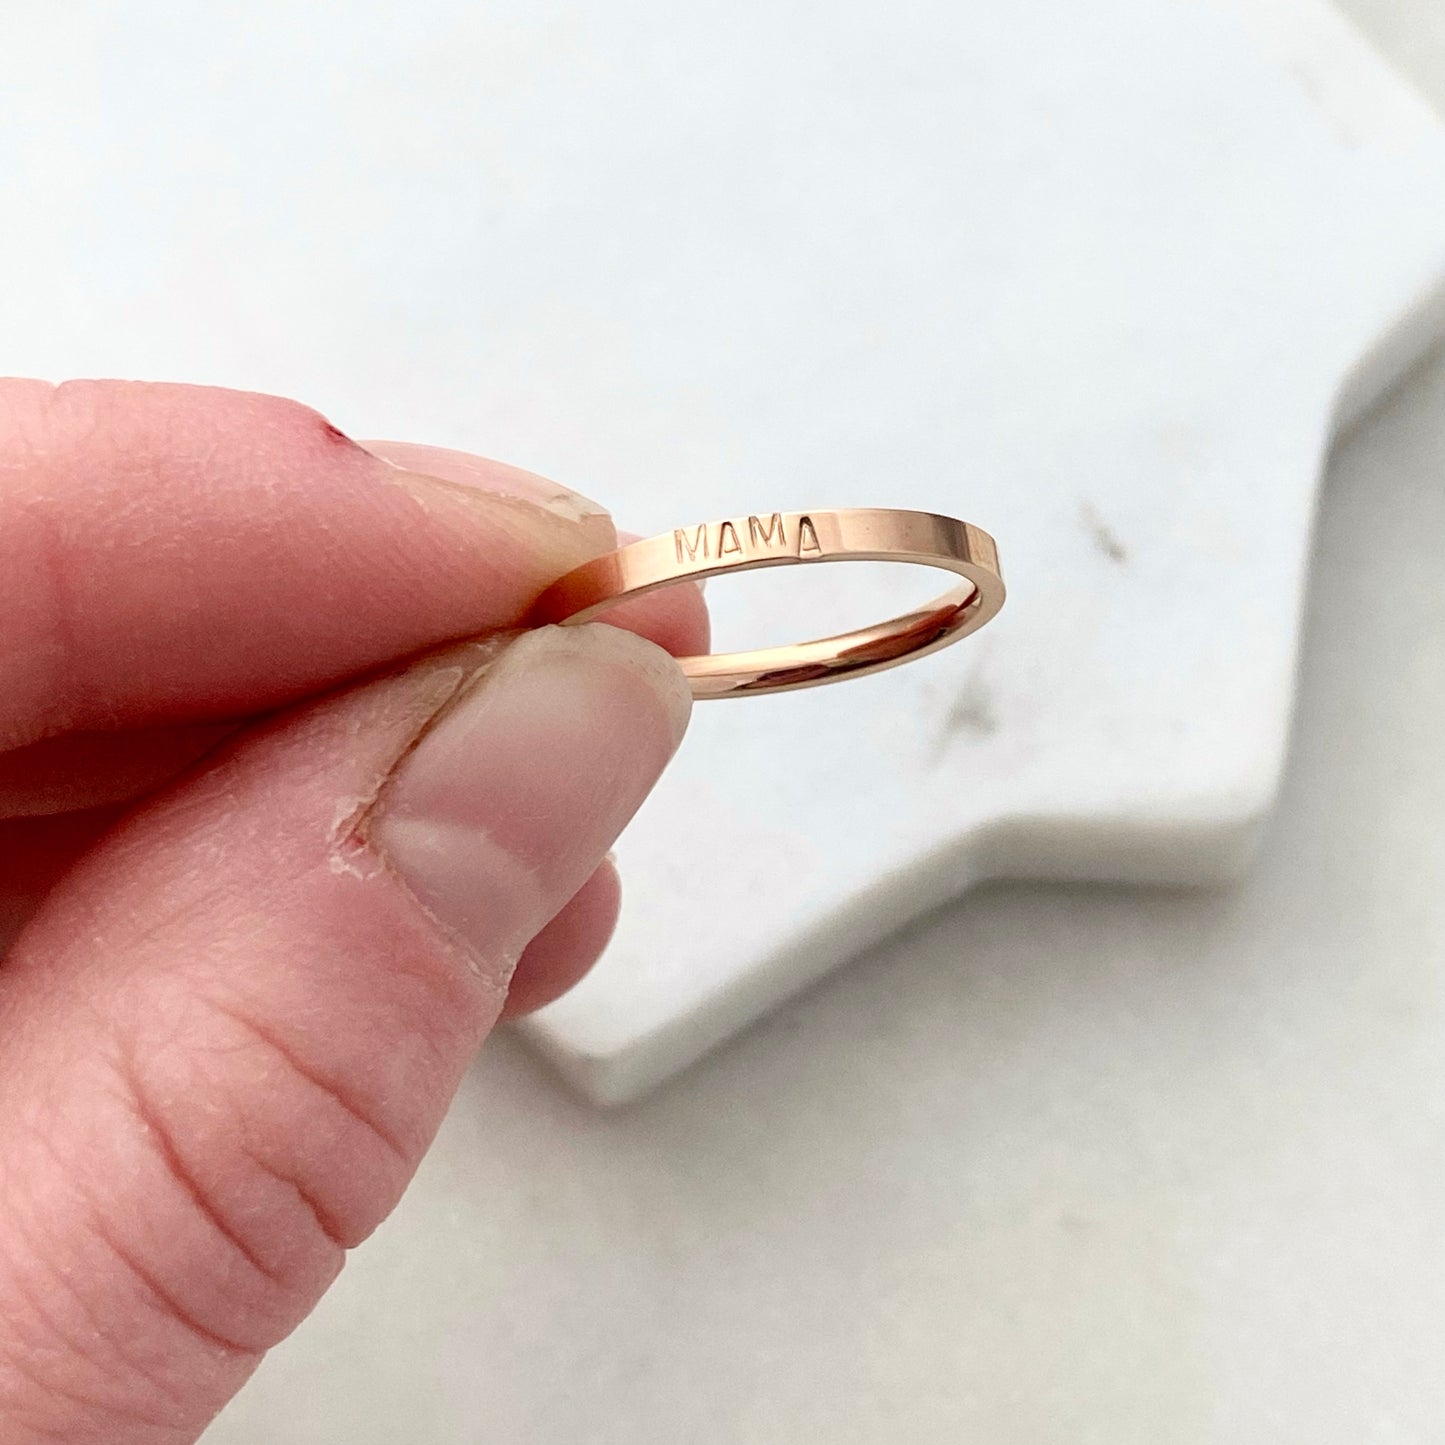 Mama, Size 7, Rose Gold Mini Stacking Ring, Stainless Steel Jewelry, Minimalist Rings, Waterproof Jewelry, Dainty Ring, Stacking Ring Set Rings callistafaye   